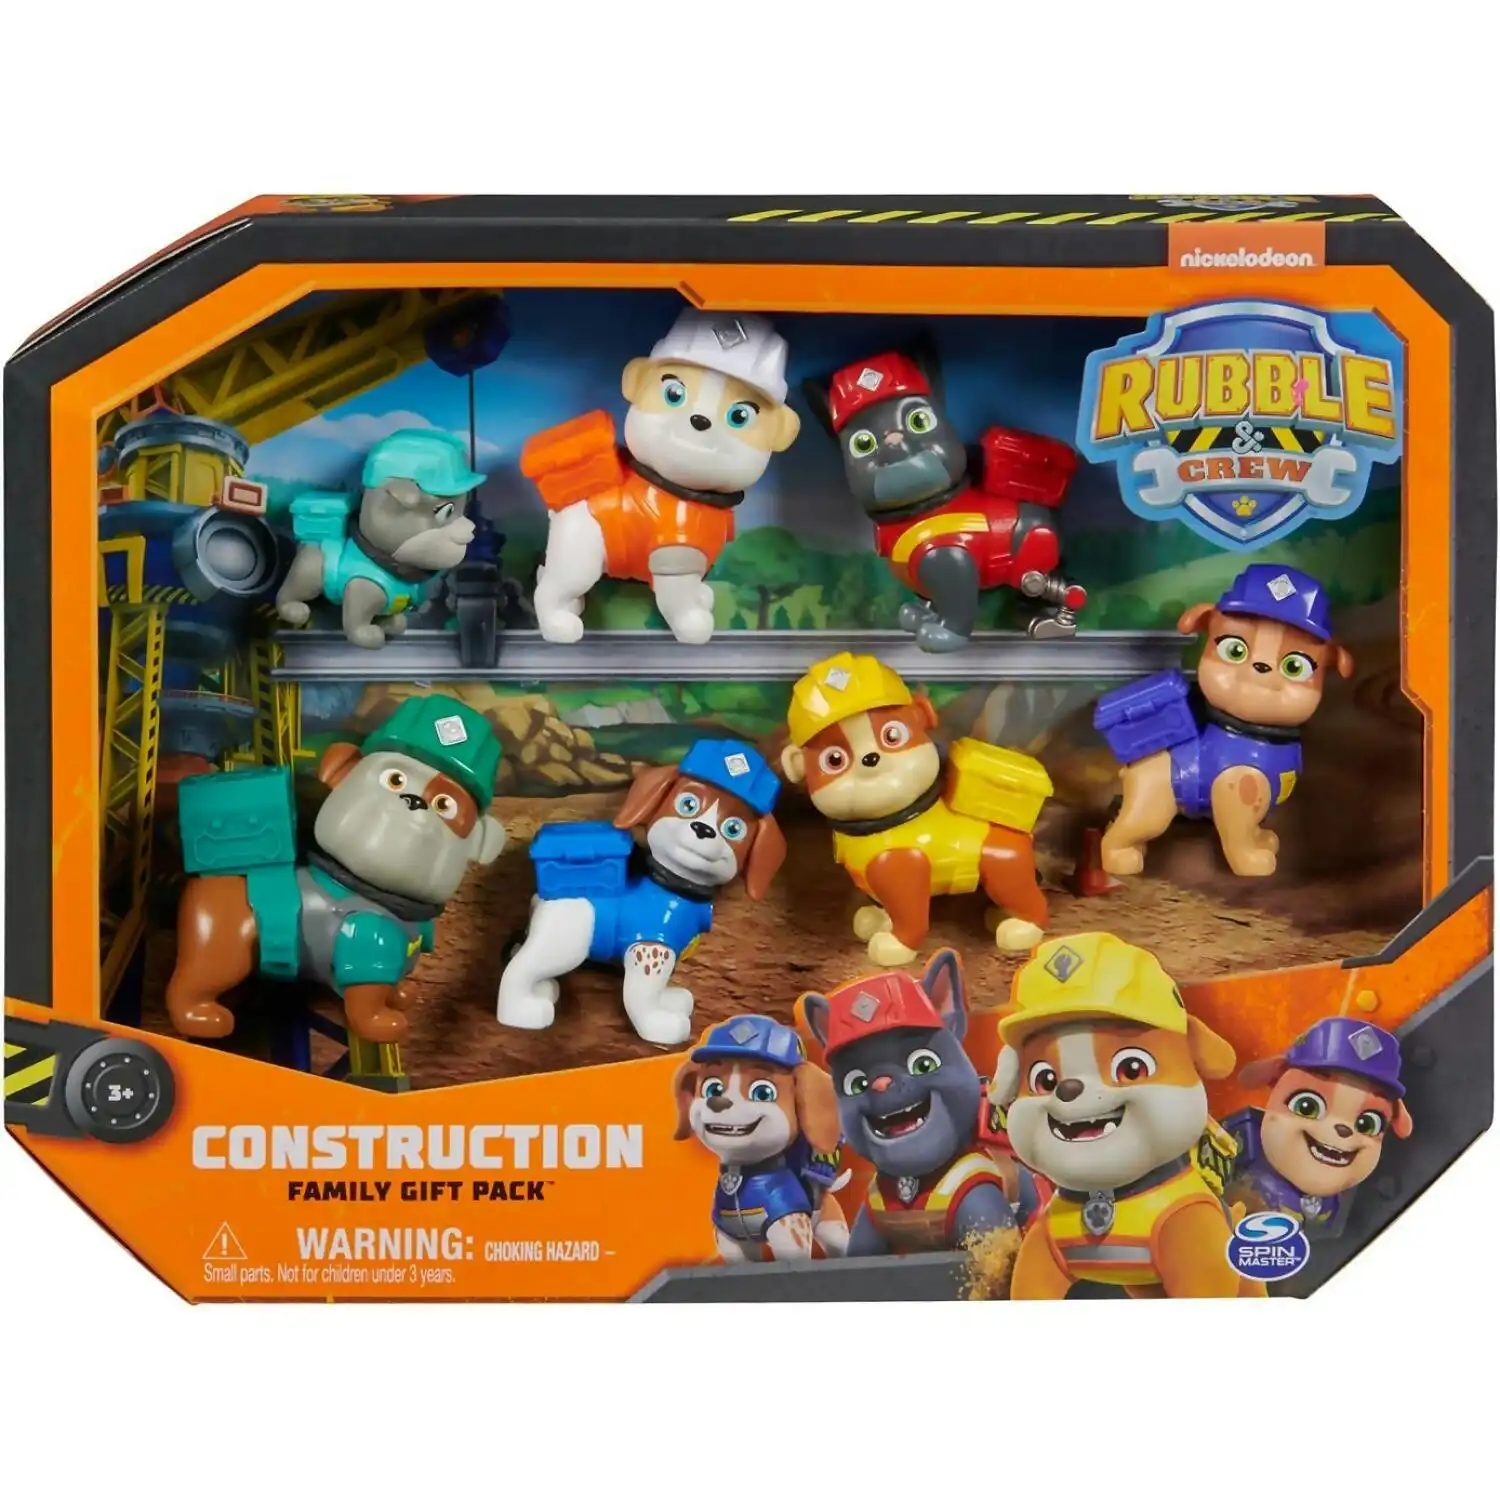 Paw Patrol - Rubble & Crew Toy Figures Gift Pack With 7 Collectible Action Figures - Spin Master